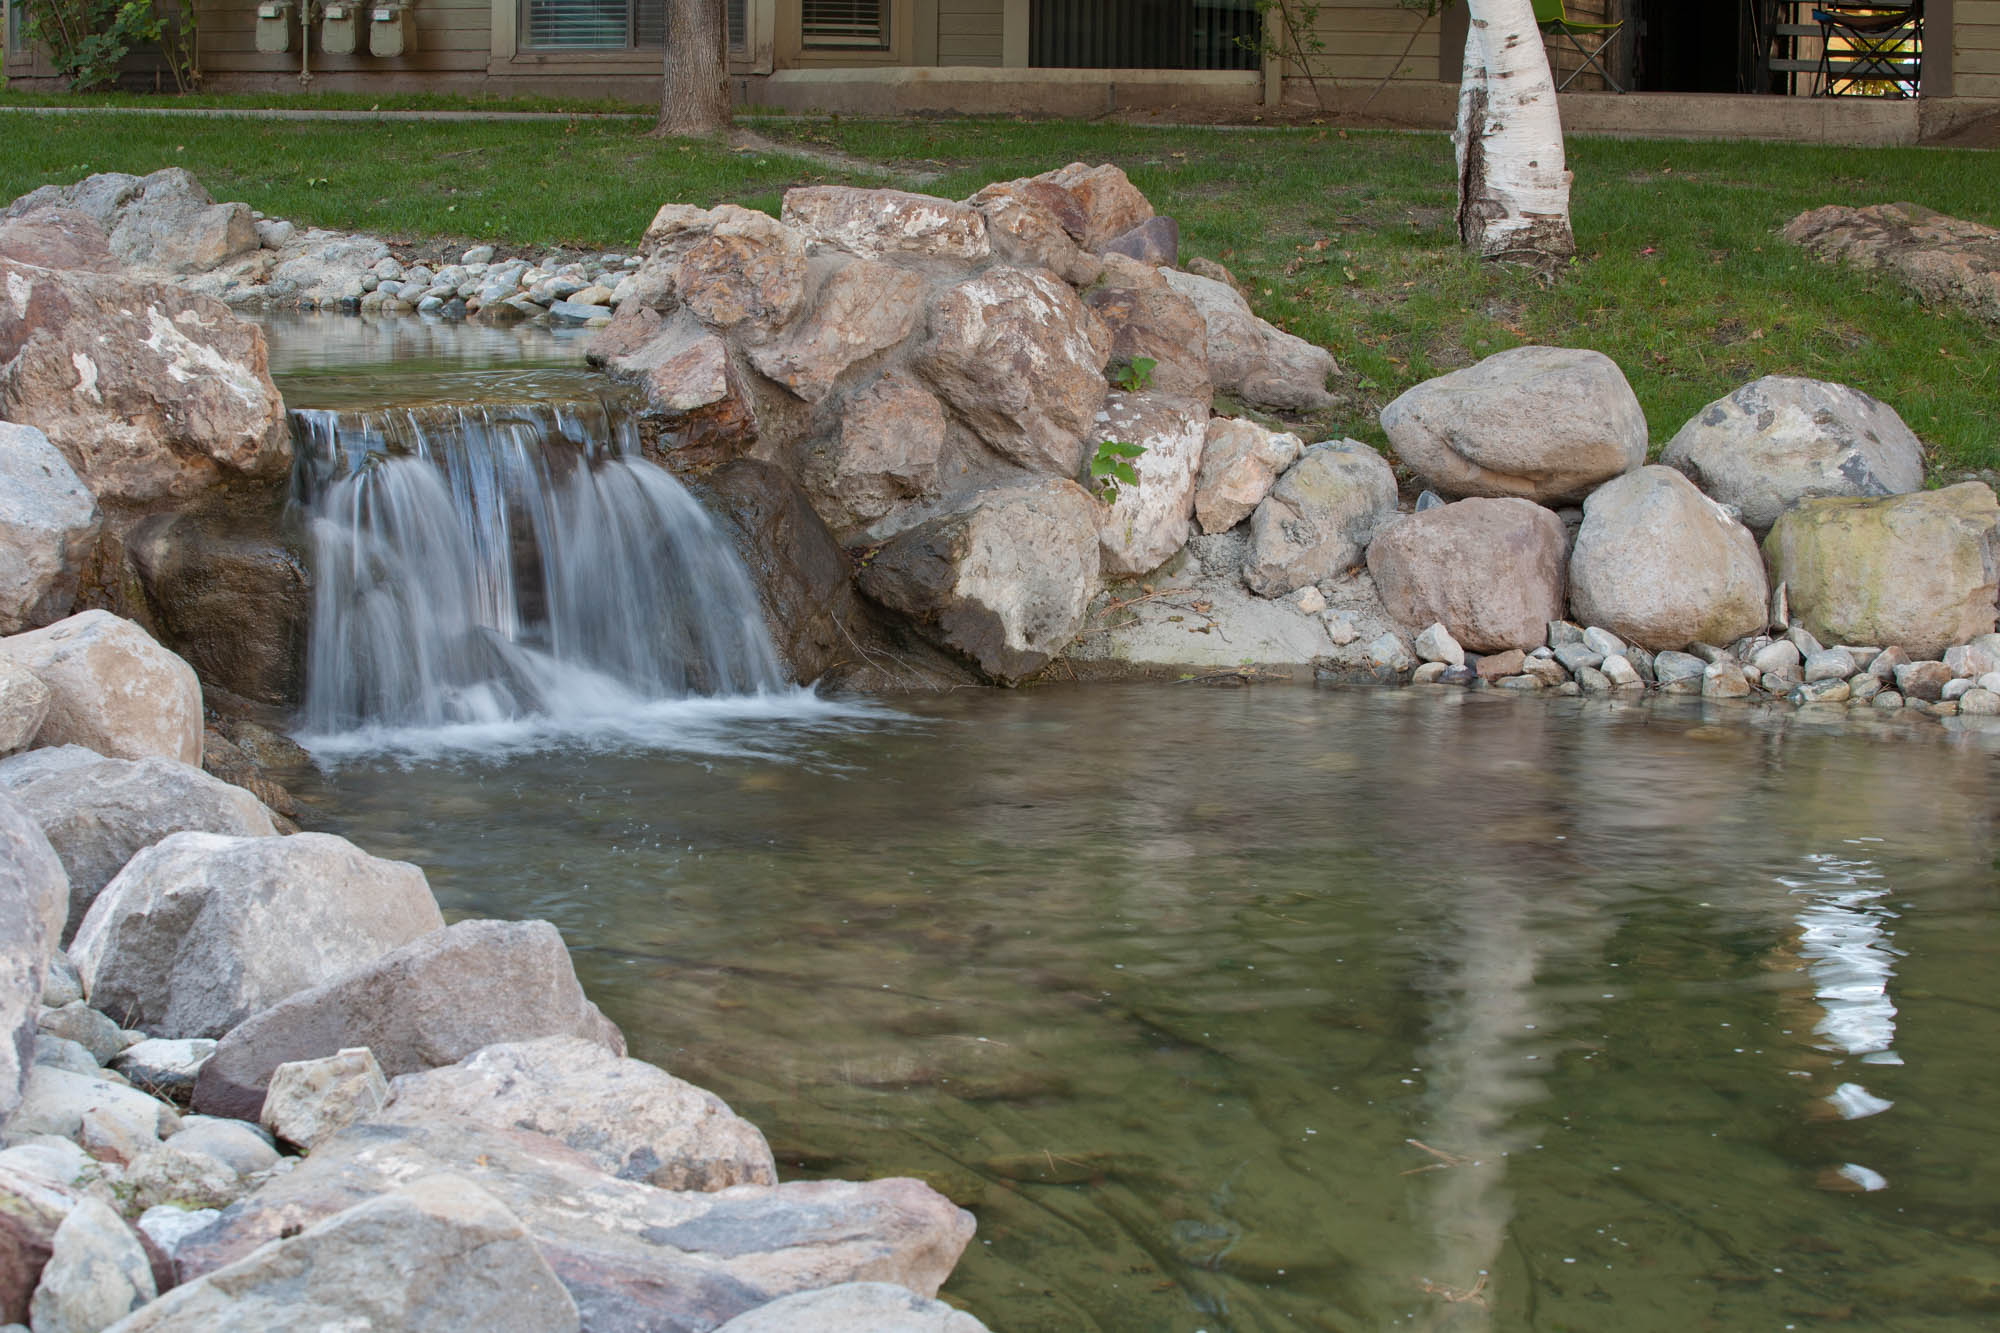 A water feature at James Pointe apartments near Salt Lake City, Utah.